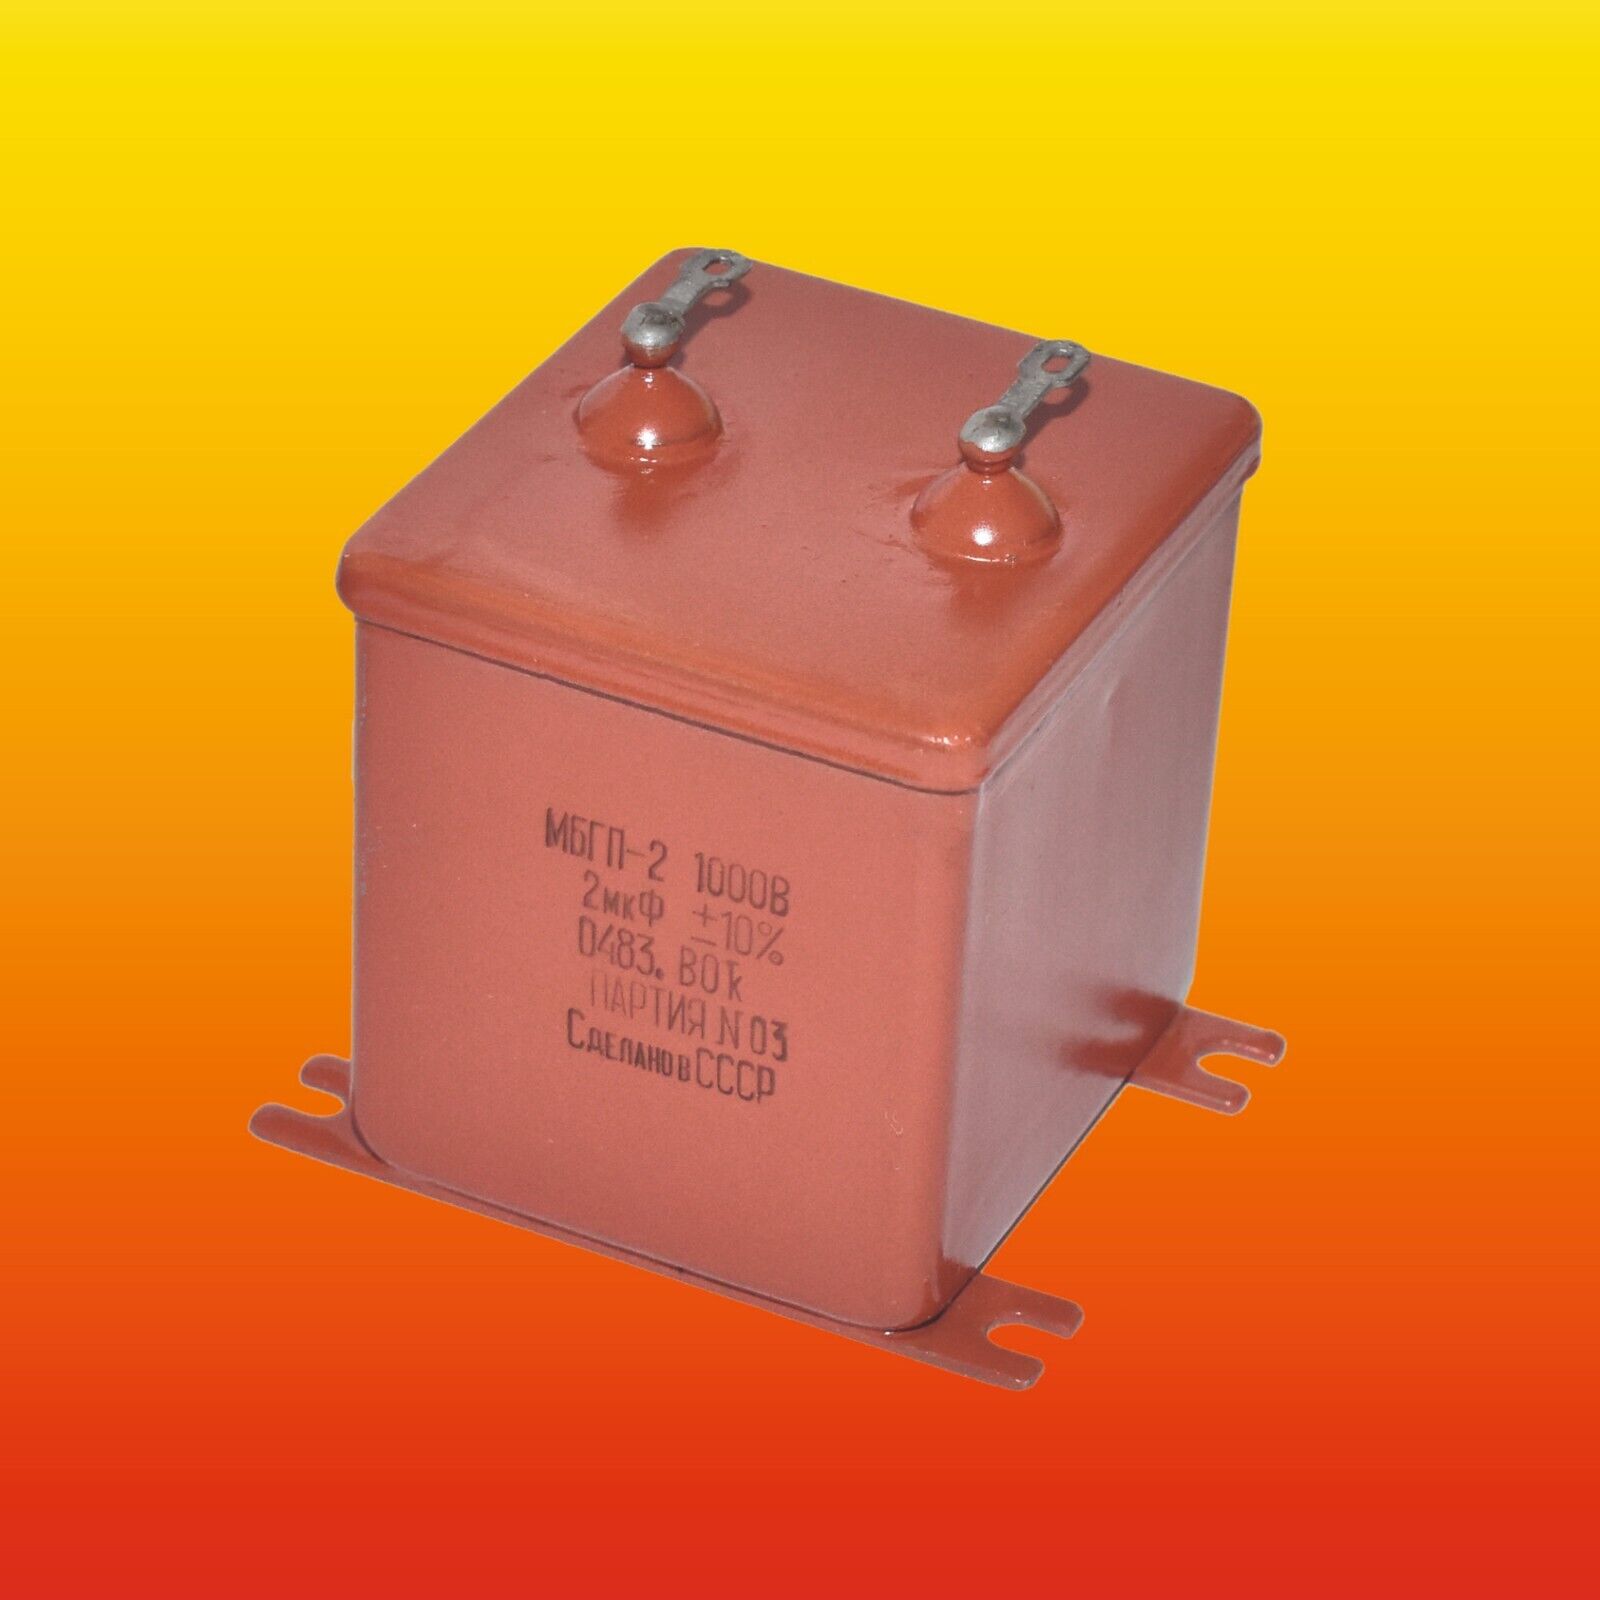 2 uF 10% 1000 V RUSSIAN PAPER IN OIL PIO AUDIO CAPACITOR MBGP-2 МБГП-2